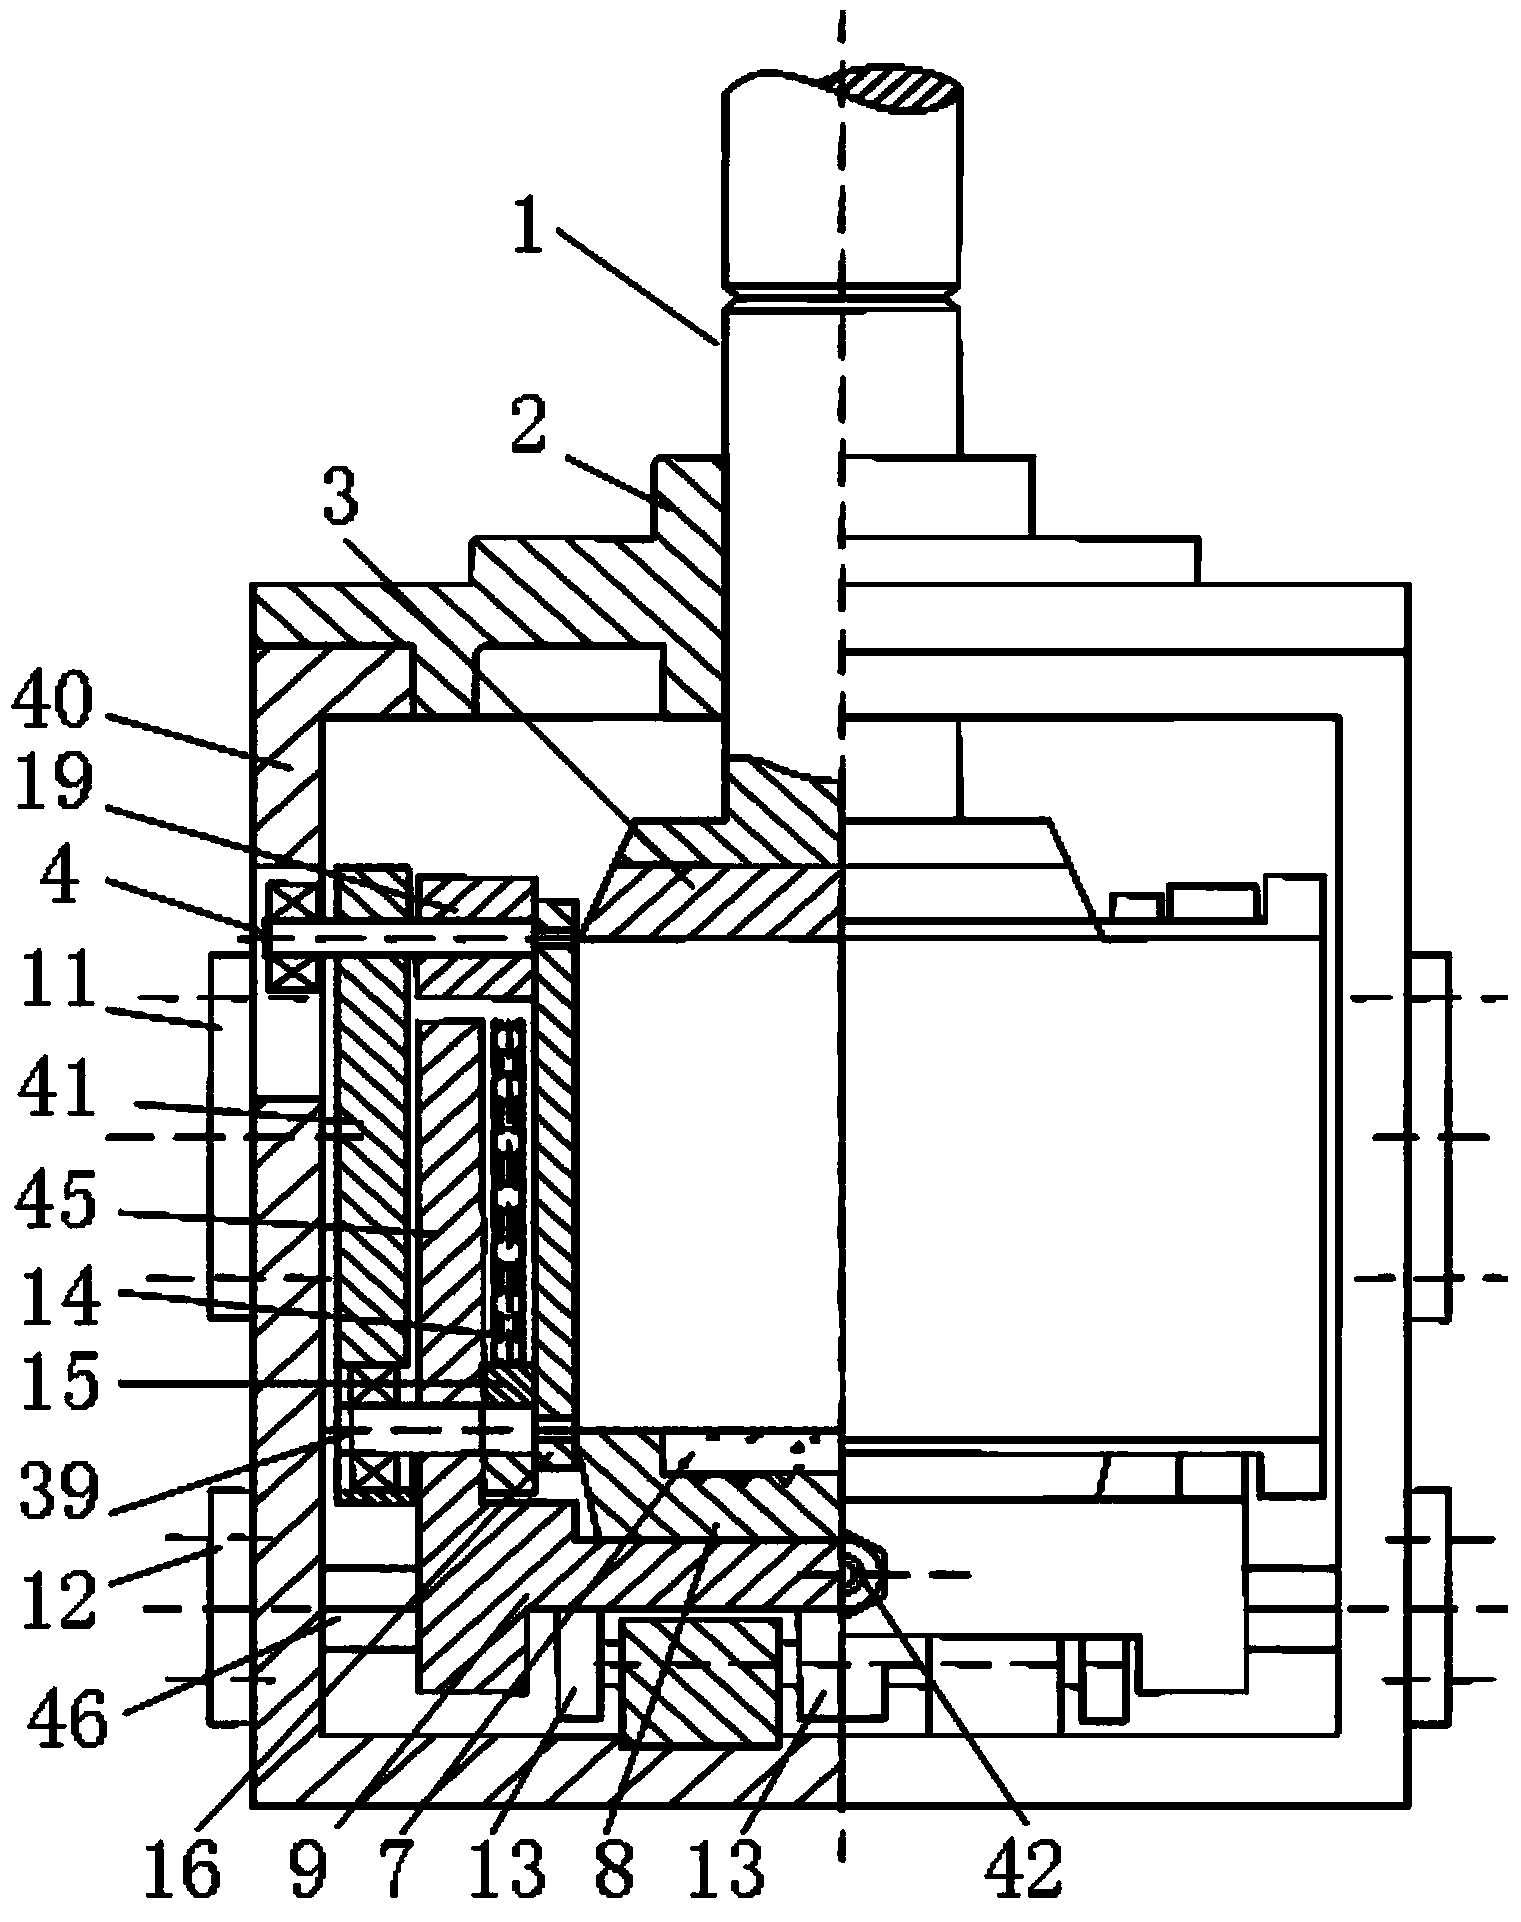 Dynamic simple shear apparatus of servo cylinder-driven cubic articulated mechanism